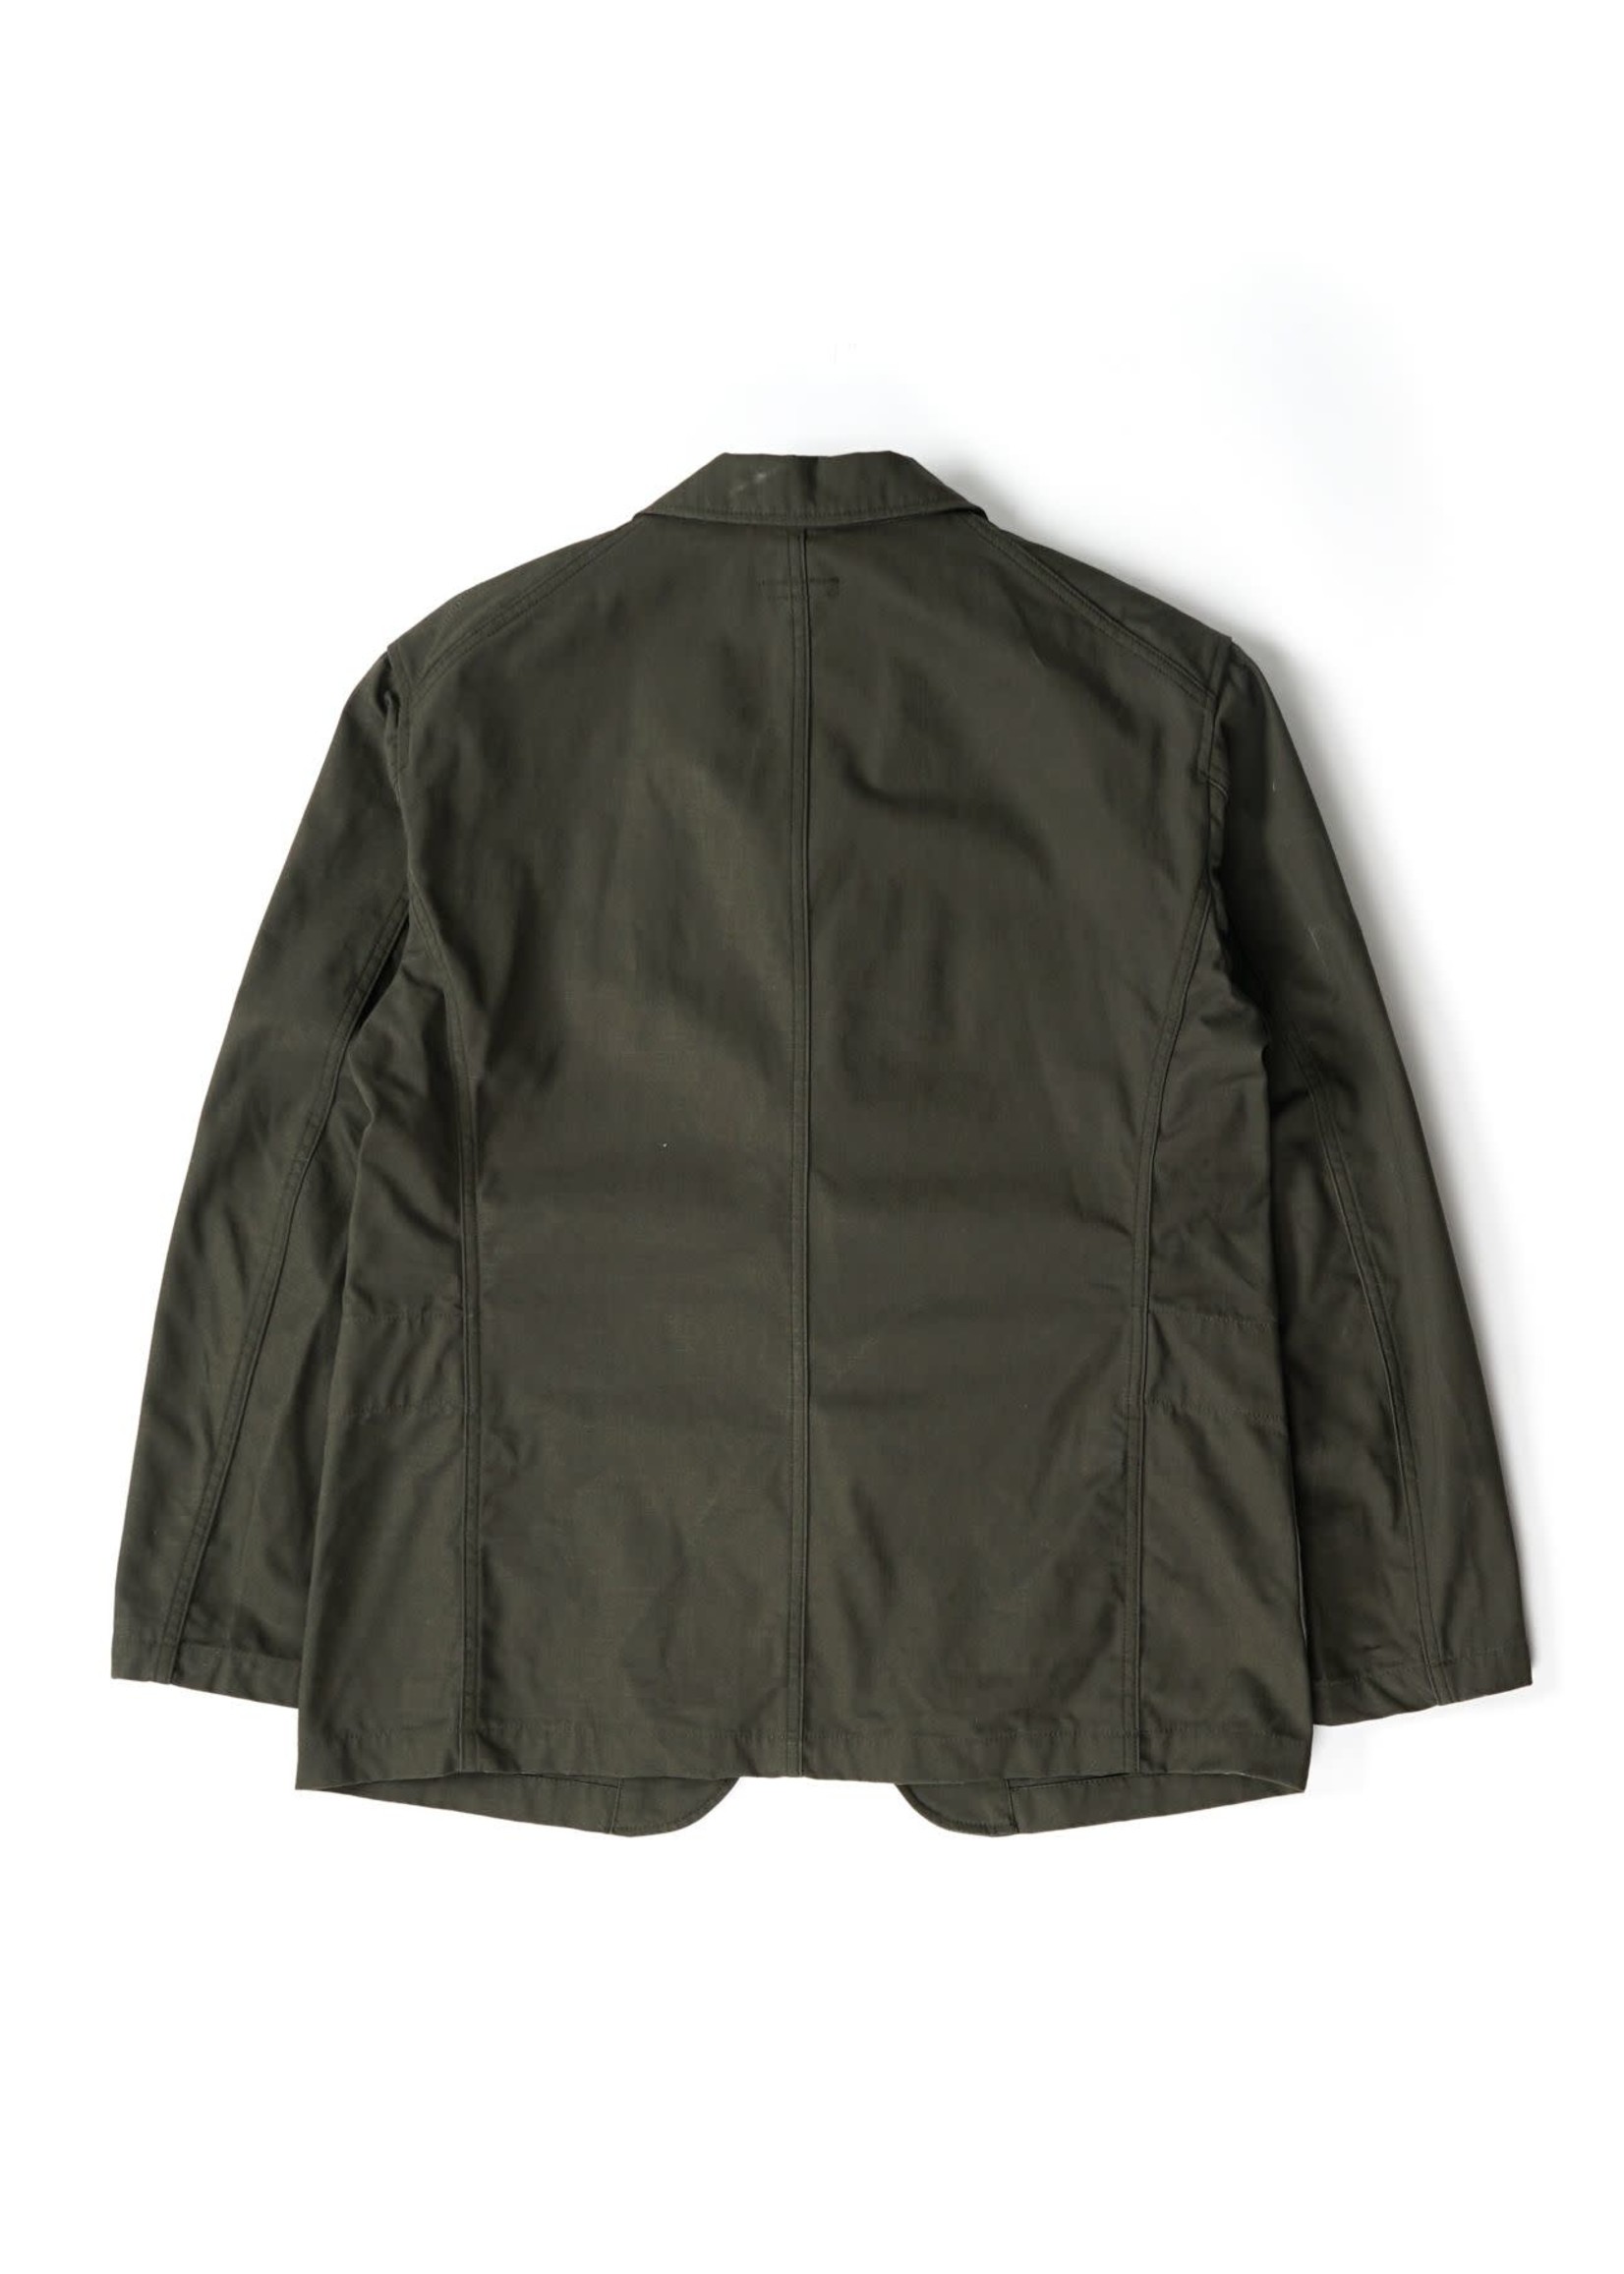 EG Bedford Jacket Olive Heavy Weight Cotton Ripstop (21F1D005 ...